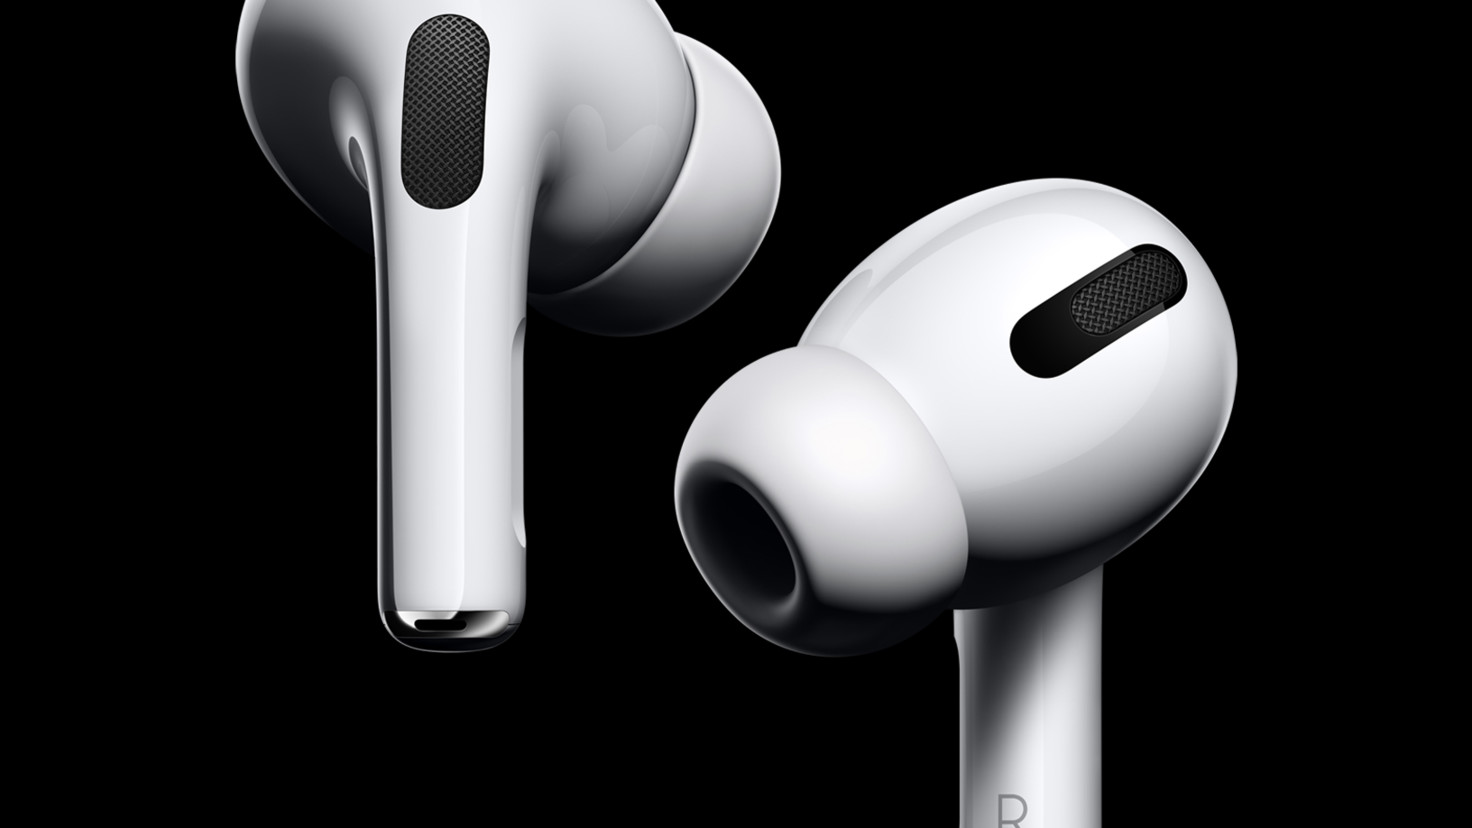 Apple reveals new AirPods Pro